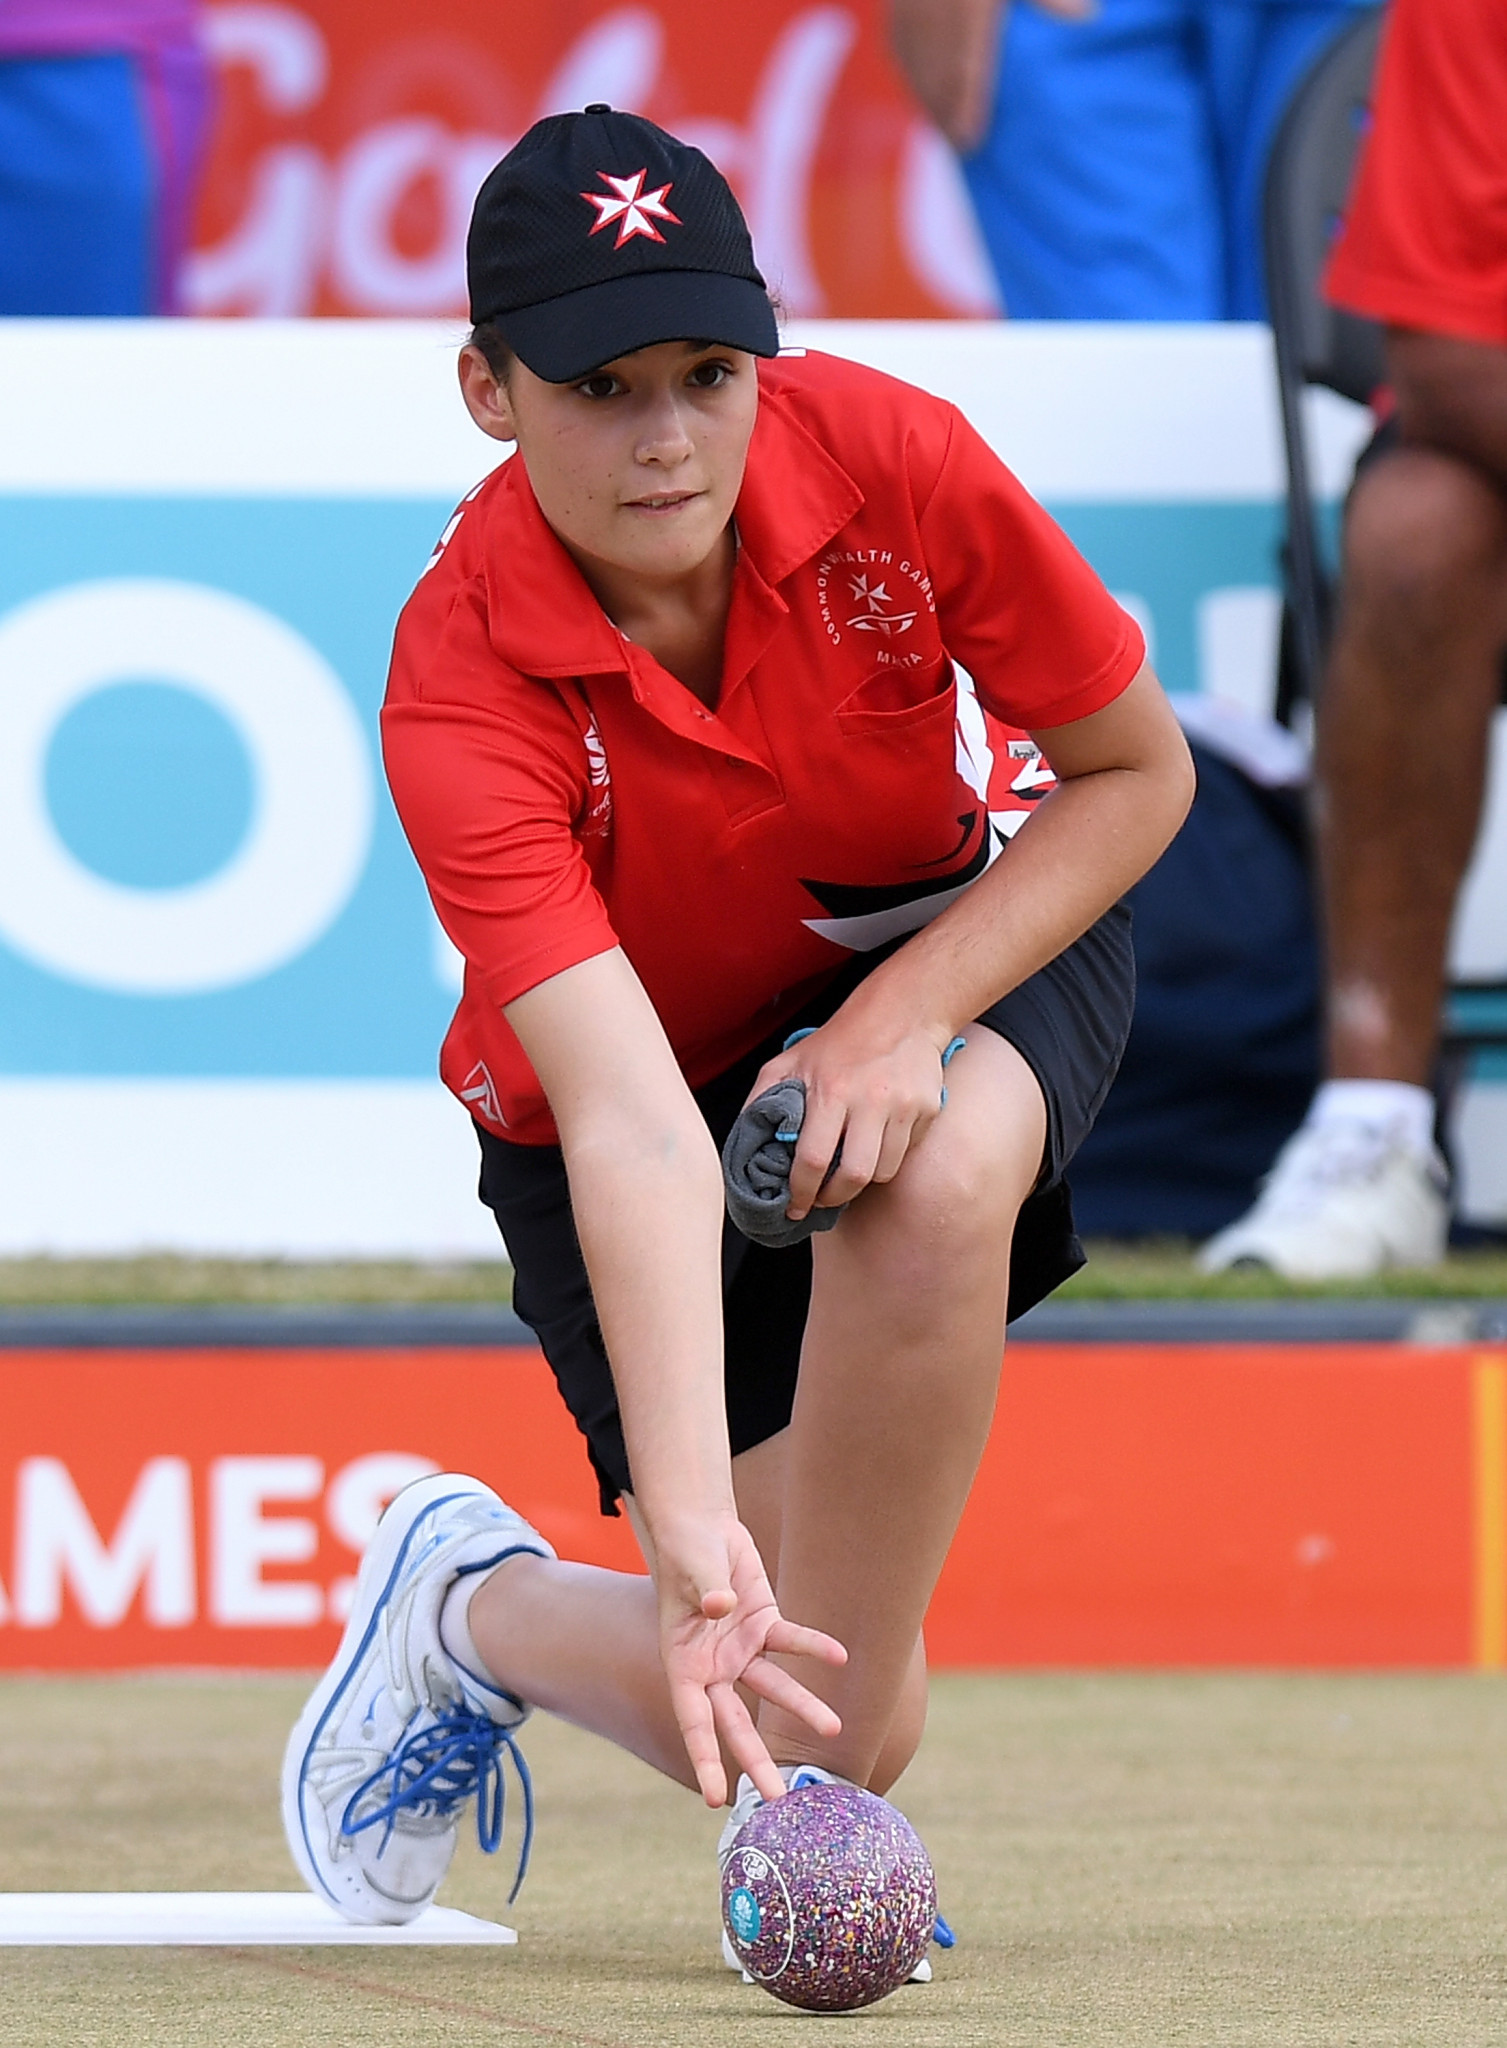 Maltese duo Rebecca Rixon, pictured, and her sister Connie had to settle for silver in the women's pairs at the World Bowls Championships ©Getty Images